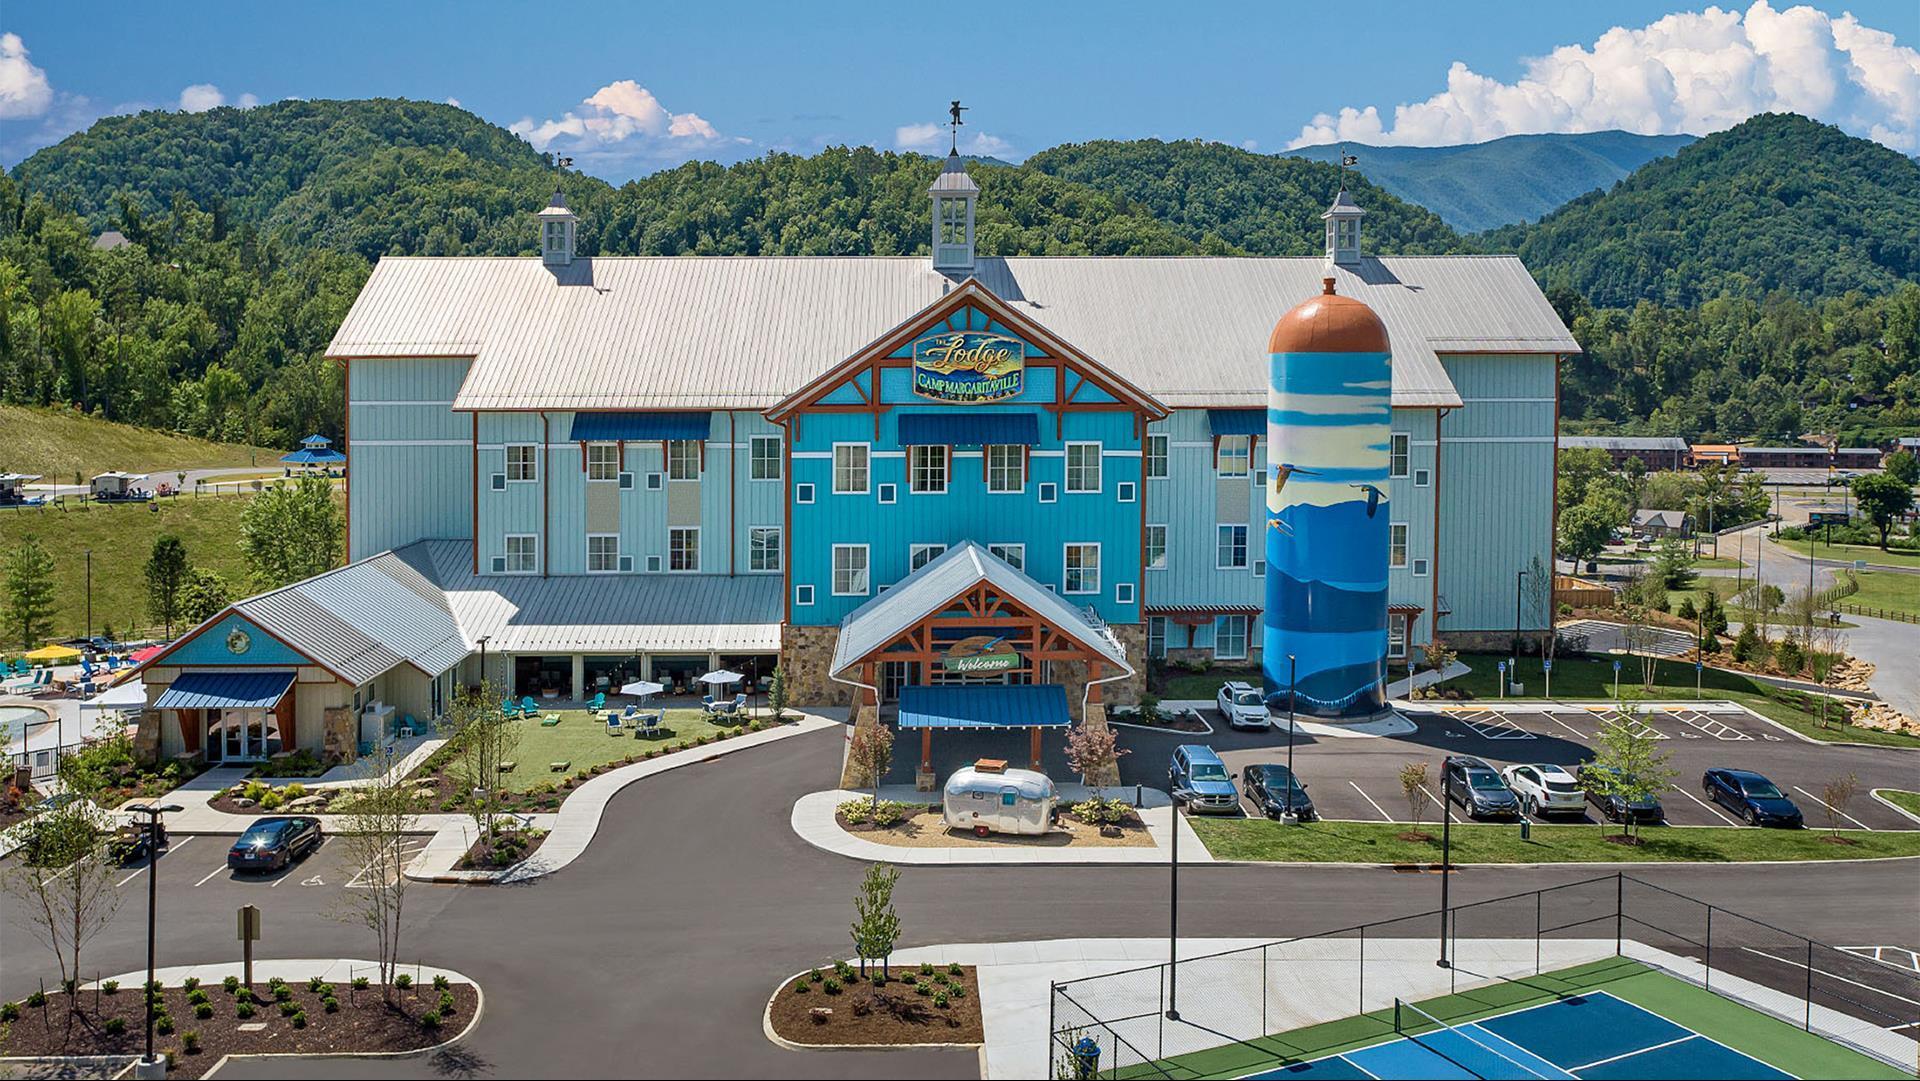 Camp Margaritaville RV Resort & Lodge Pigeon Forge in Pigeon Forge, TN